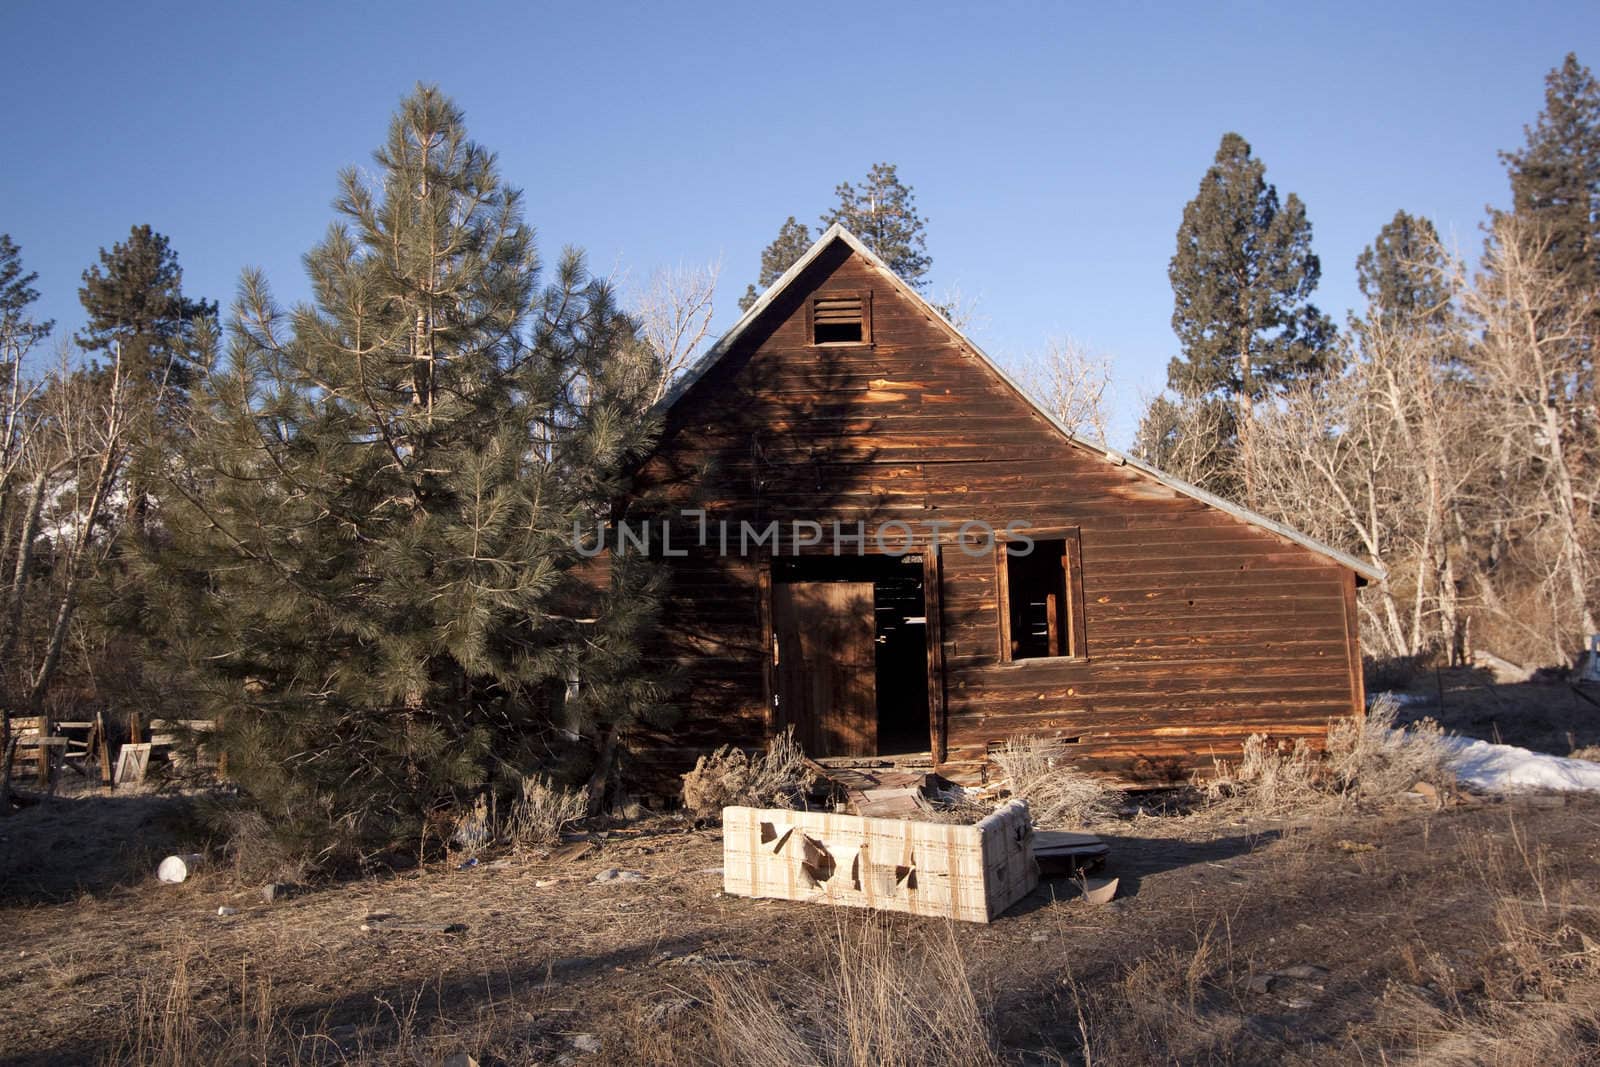 an old abandoned barn or cabin in the forest